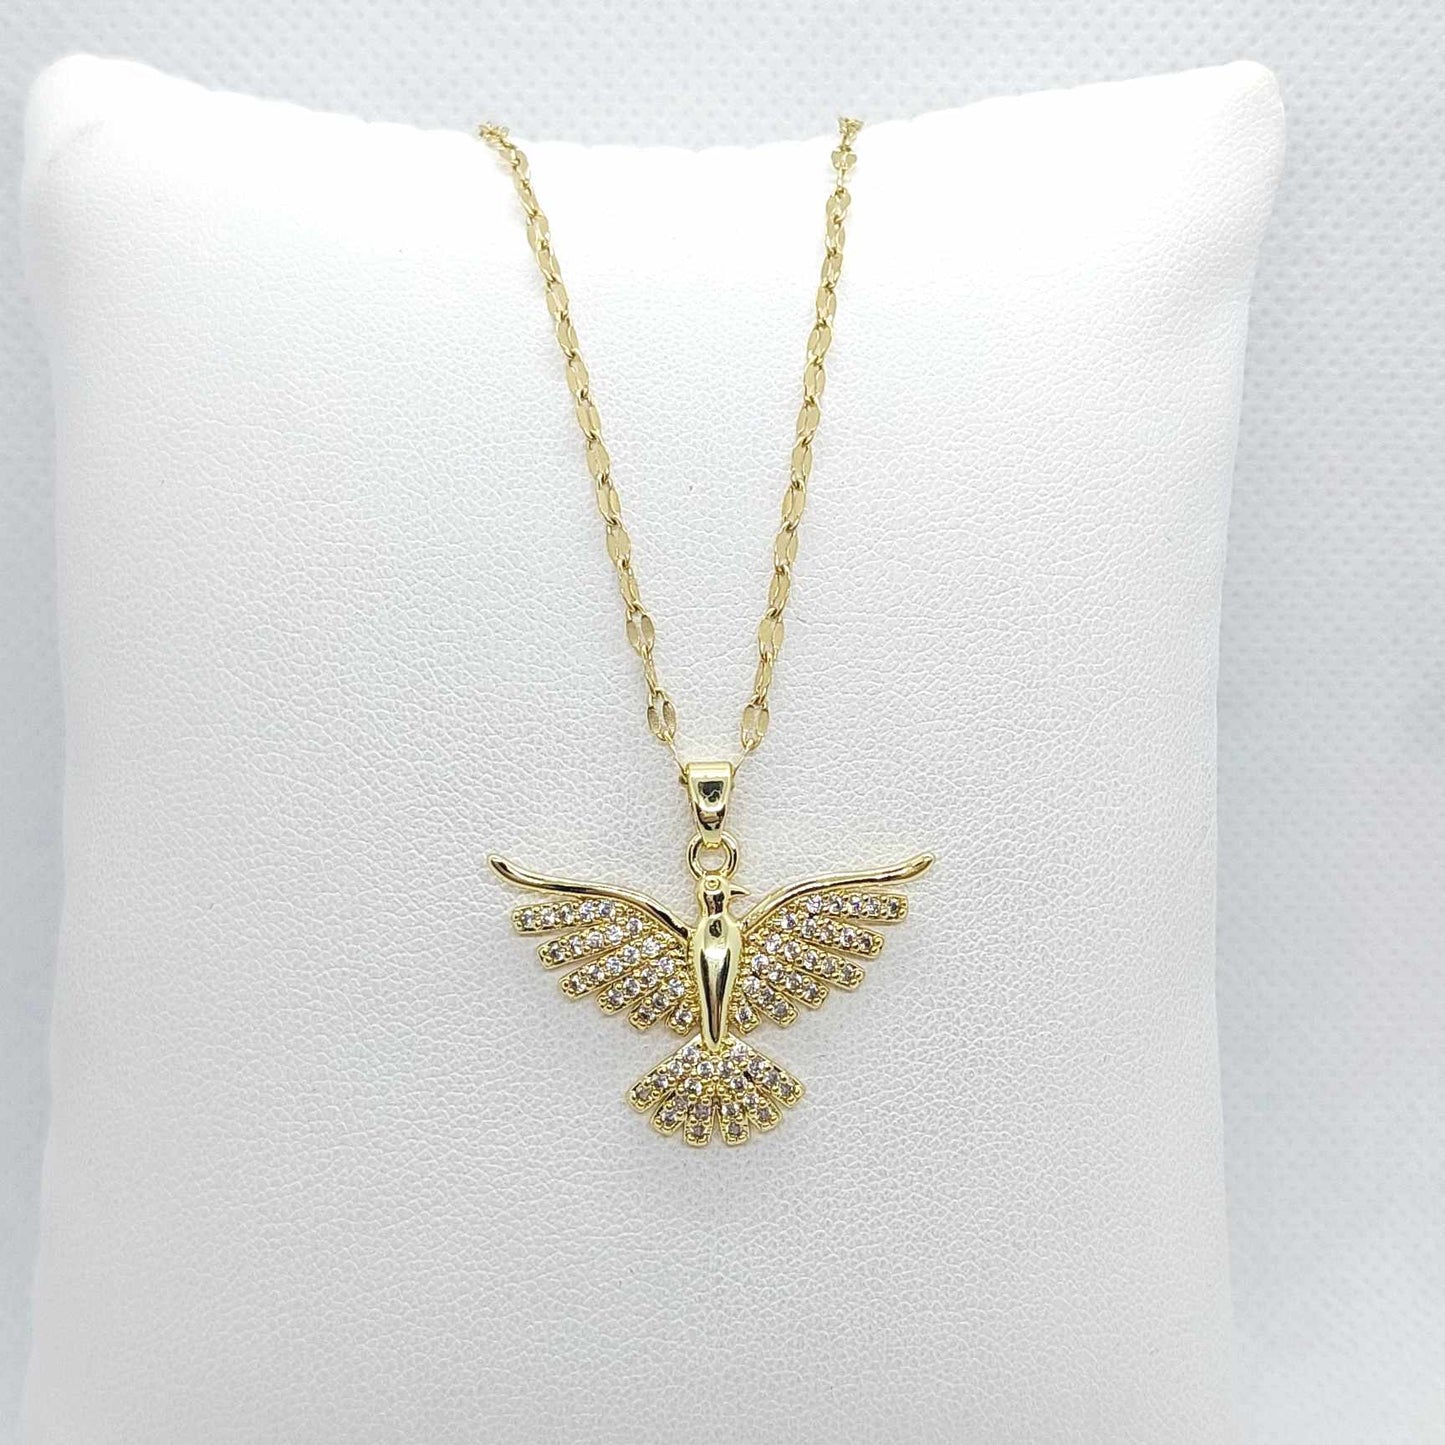 Phoenix in Zircon Pendant with Gold Plated Stainless Steel Chain Necklace